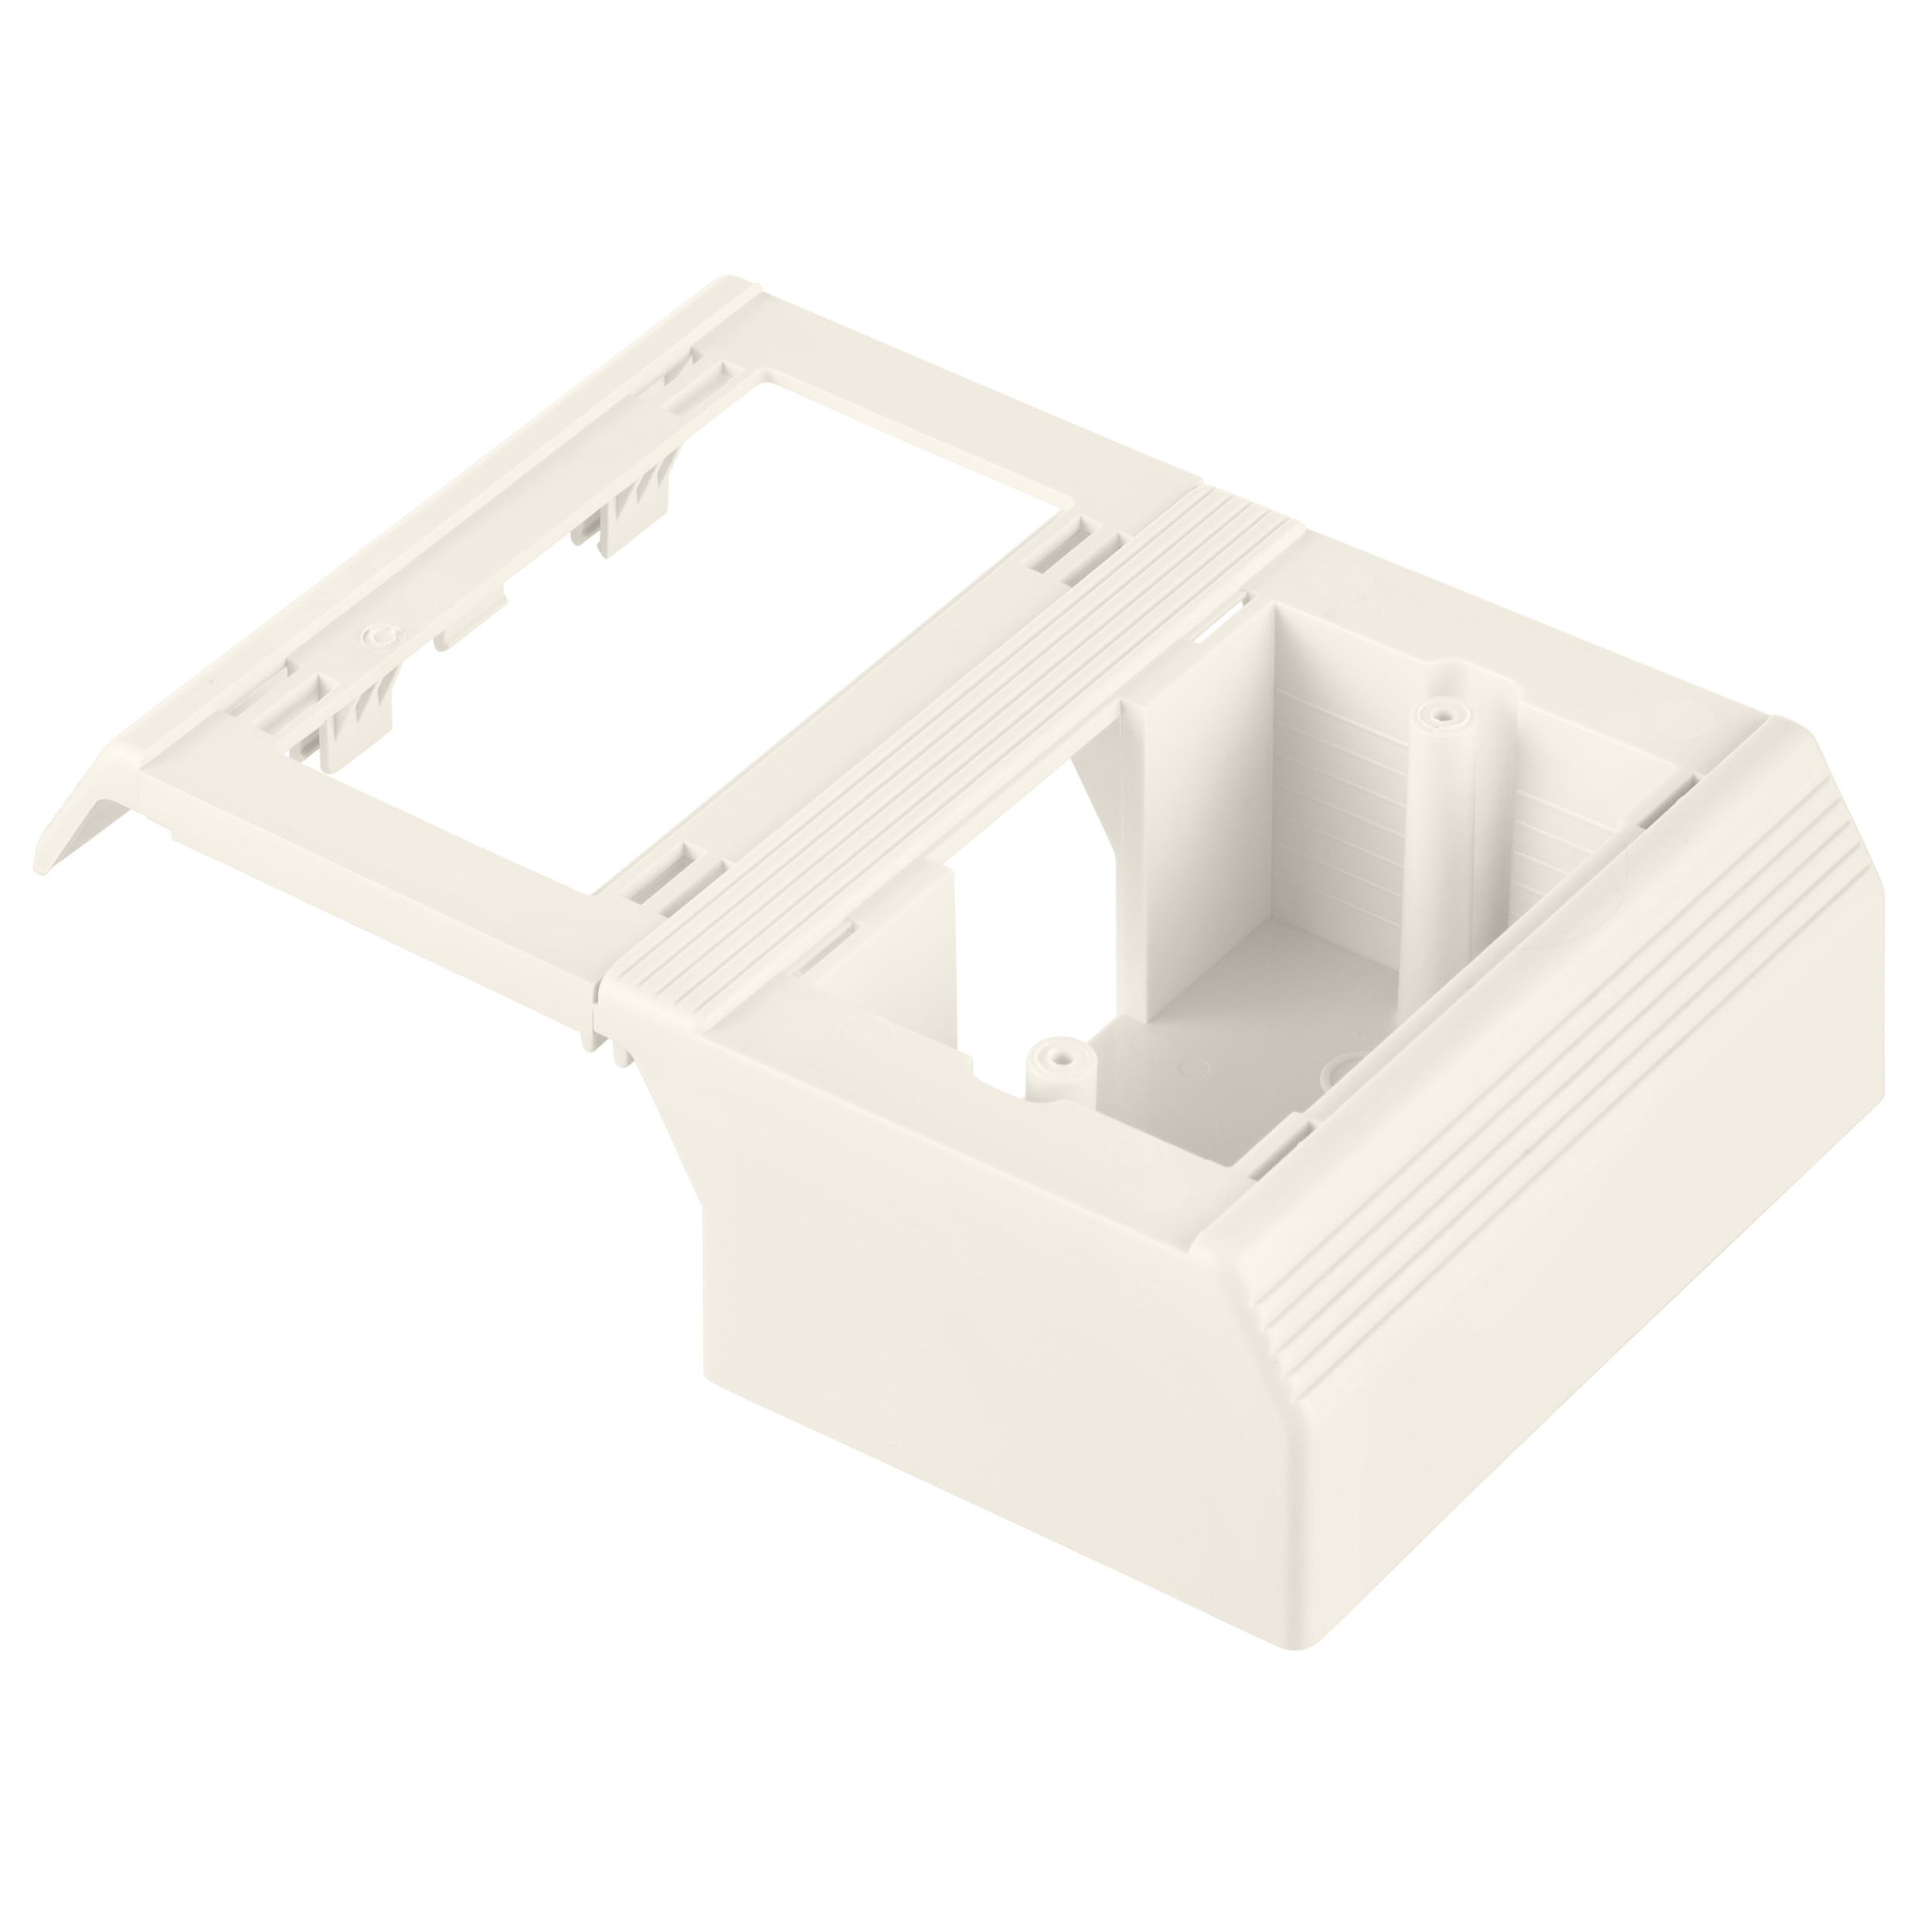 Surface Raceway, T-70 Offset Box, for Sn